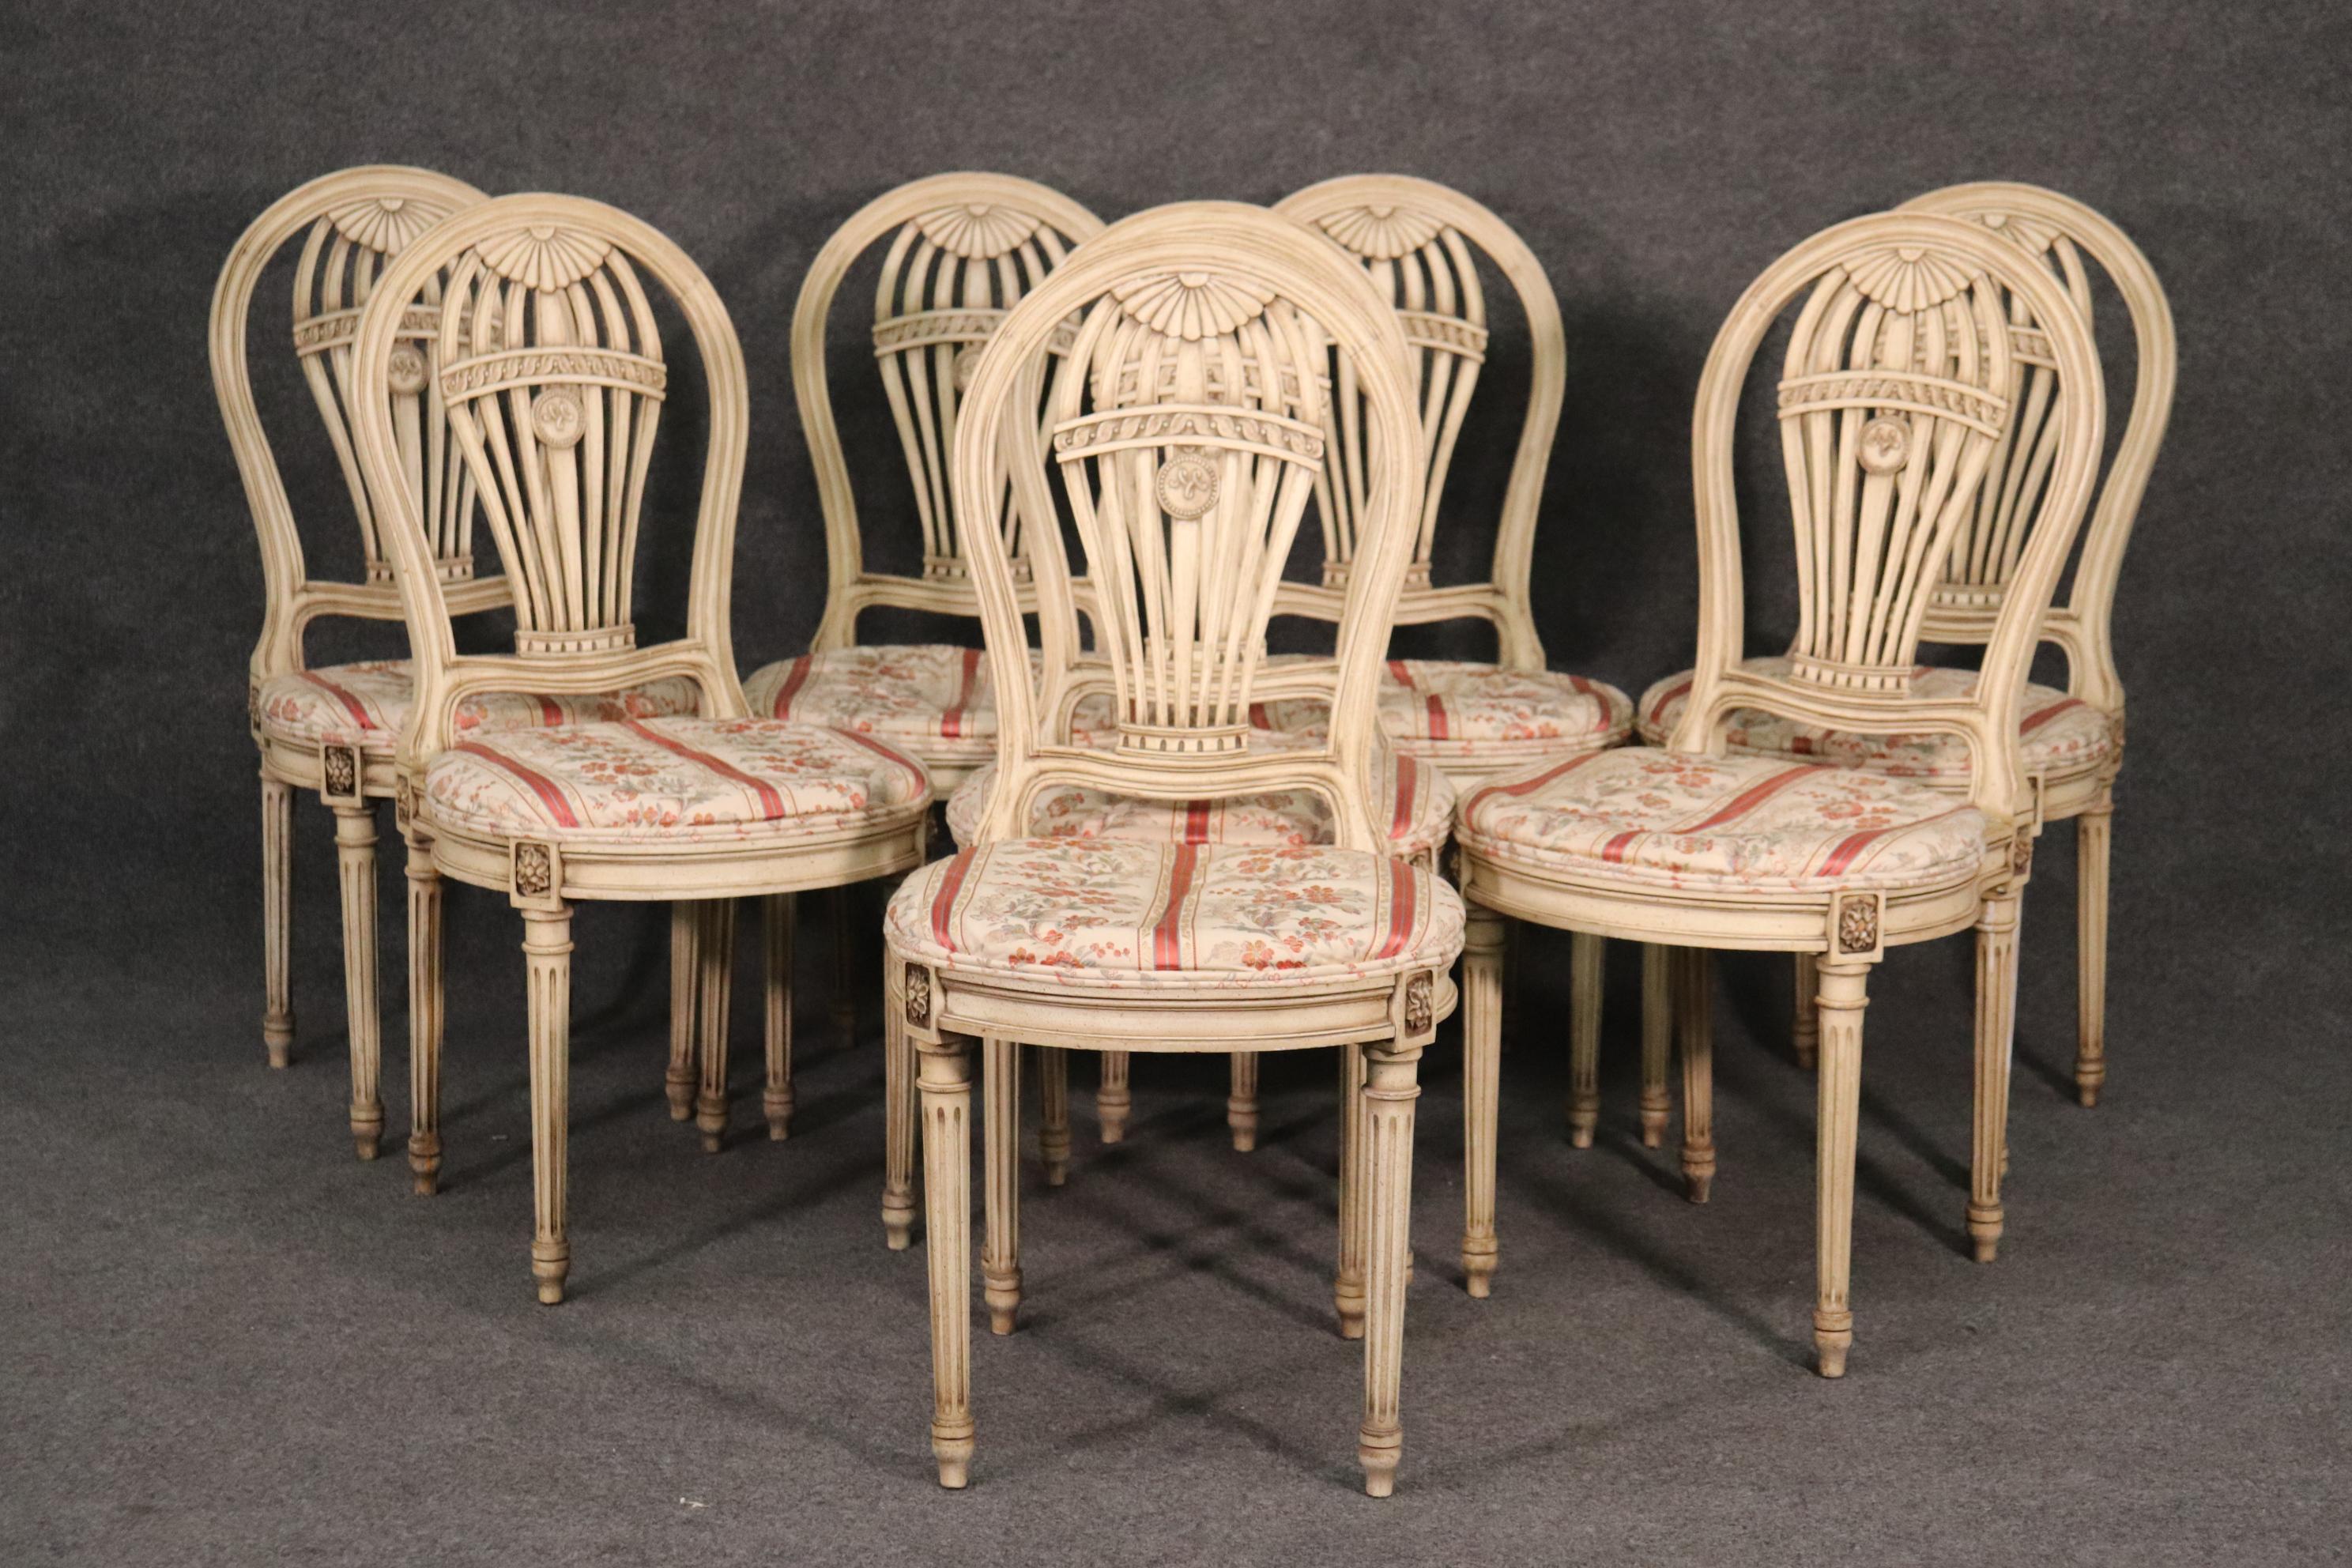 This is a gorgeous et of signed Maison Jansen dining chairs in the classic ballon back design with a beautiful antique white painted finish. The chairs measure 37 tall x 18 wide x 21 deep and the seat height is 18 inches tall. These chairs are